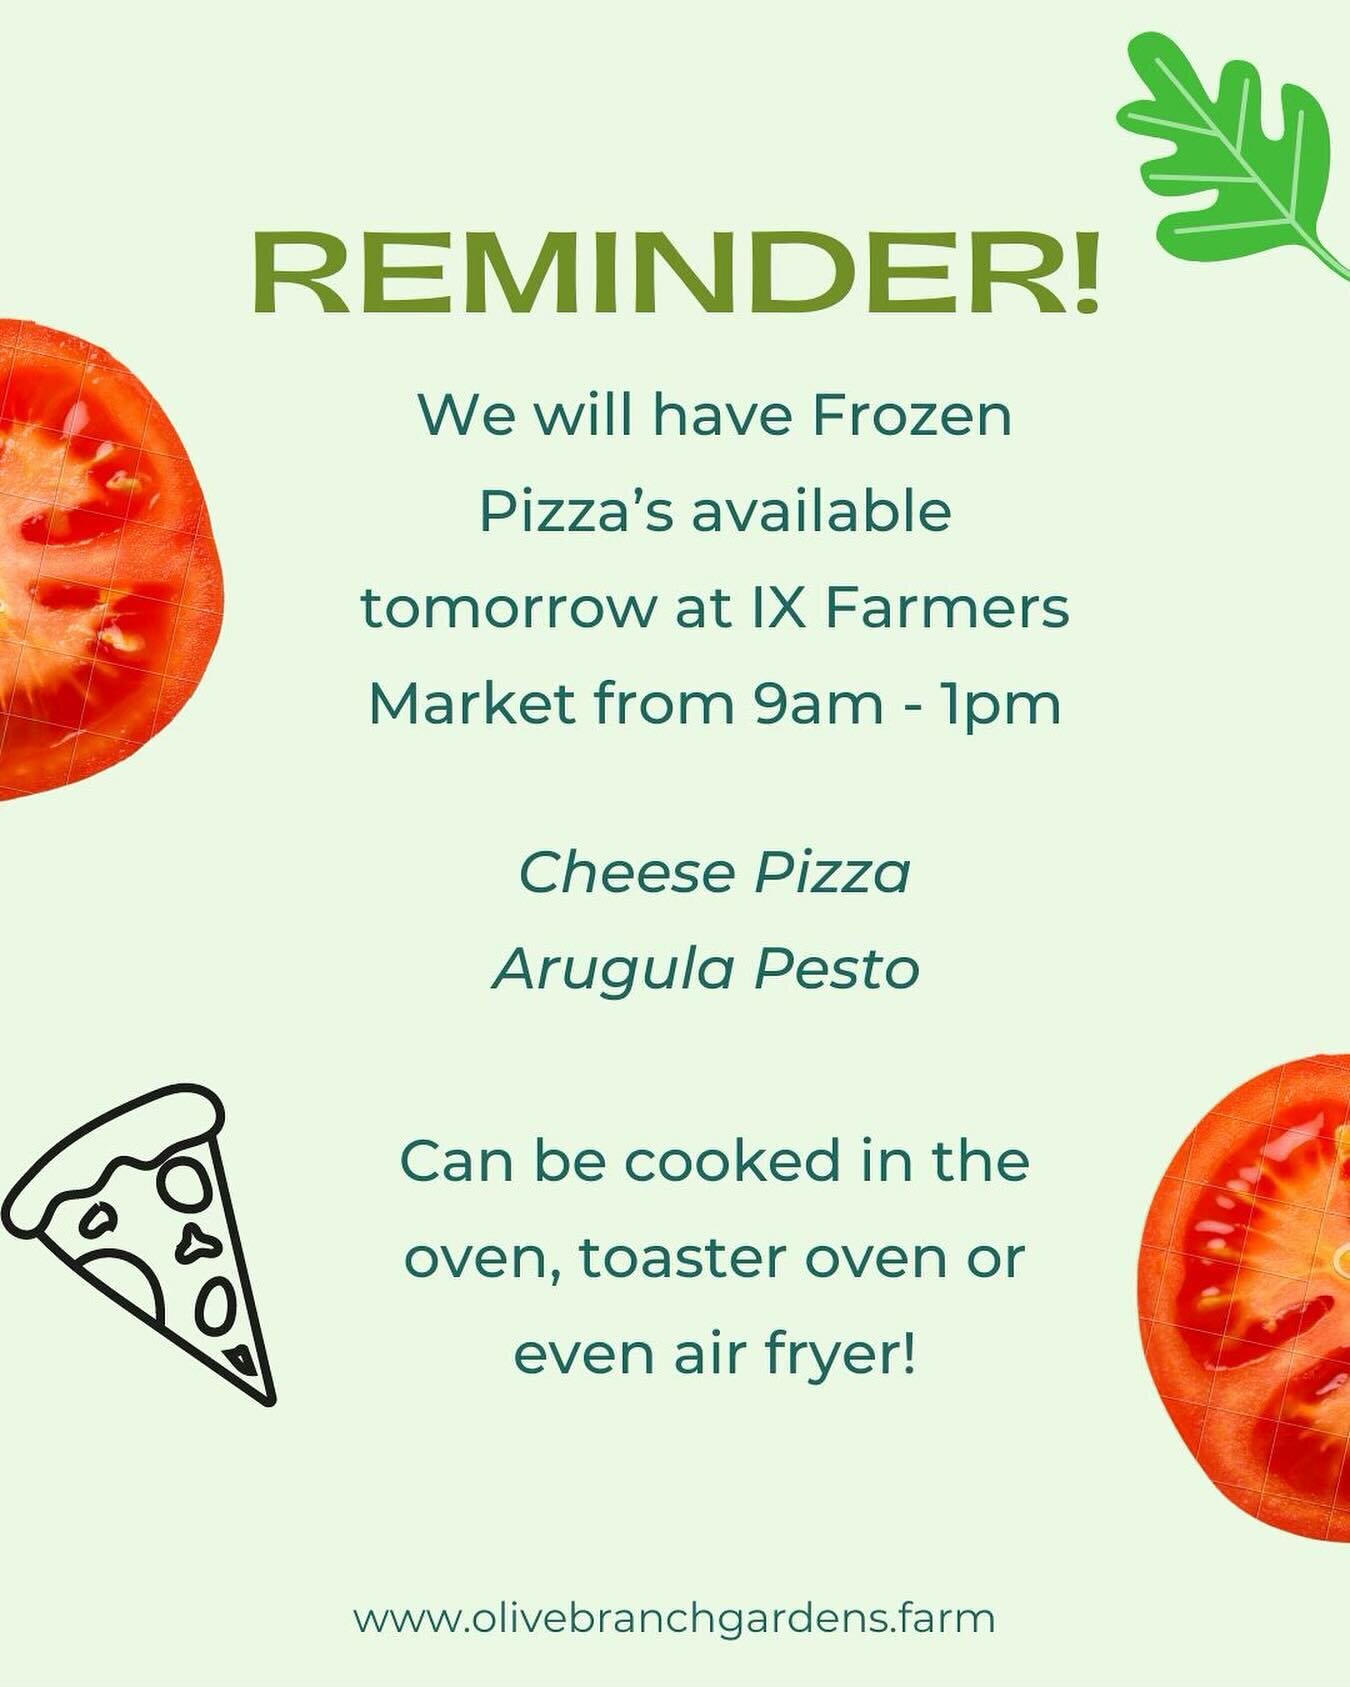 Don&rsquo;t forget - tomorrow we will be bringing frozen pizzas to @farmersmarketatix 
.
.
Cheese pizza and arugula pesto!
:
.
Don&rsquo;t miss out! This is a great way to enjoy our pizza without hanging to eat it at the market. Bring one home and en